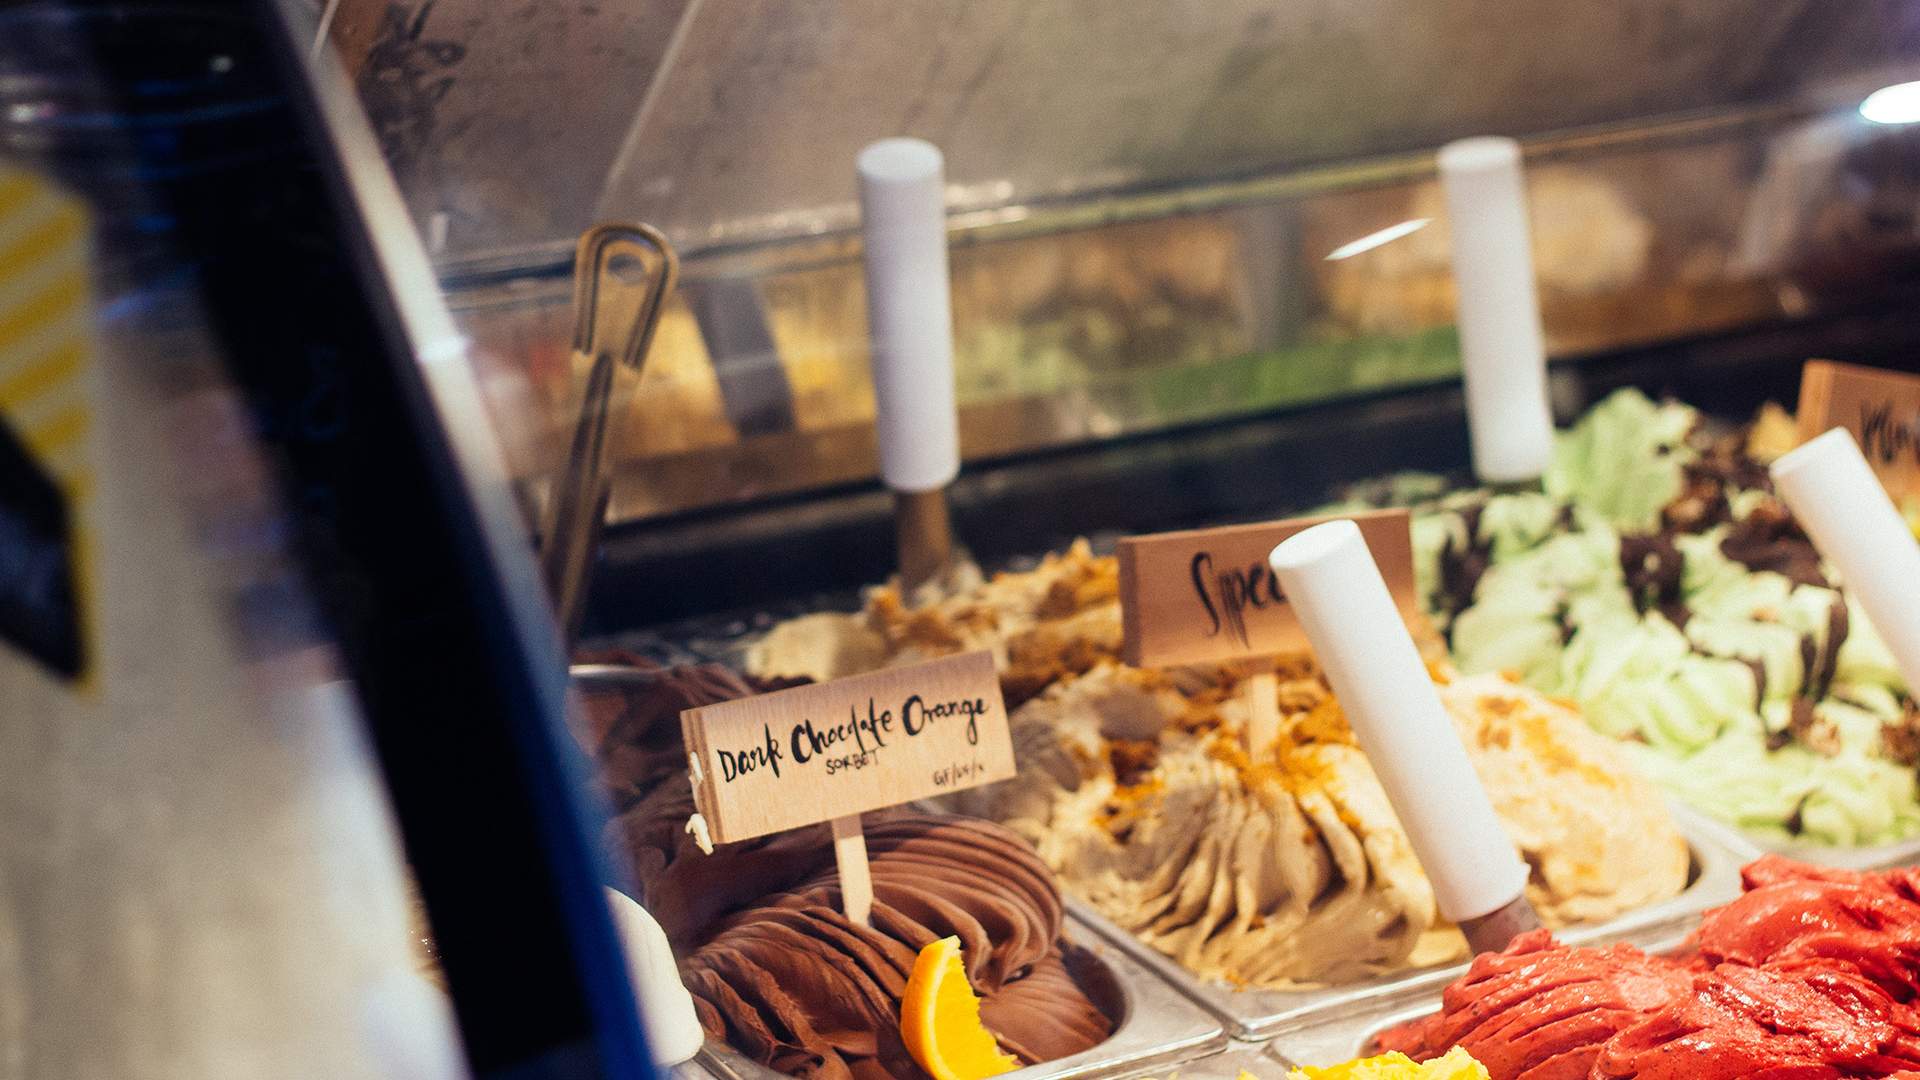 A Pint-Sized Gelateria Has Opened In Morningside